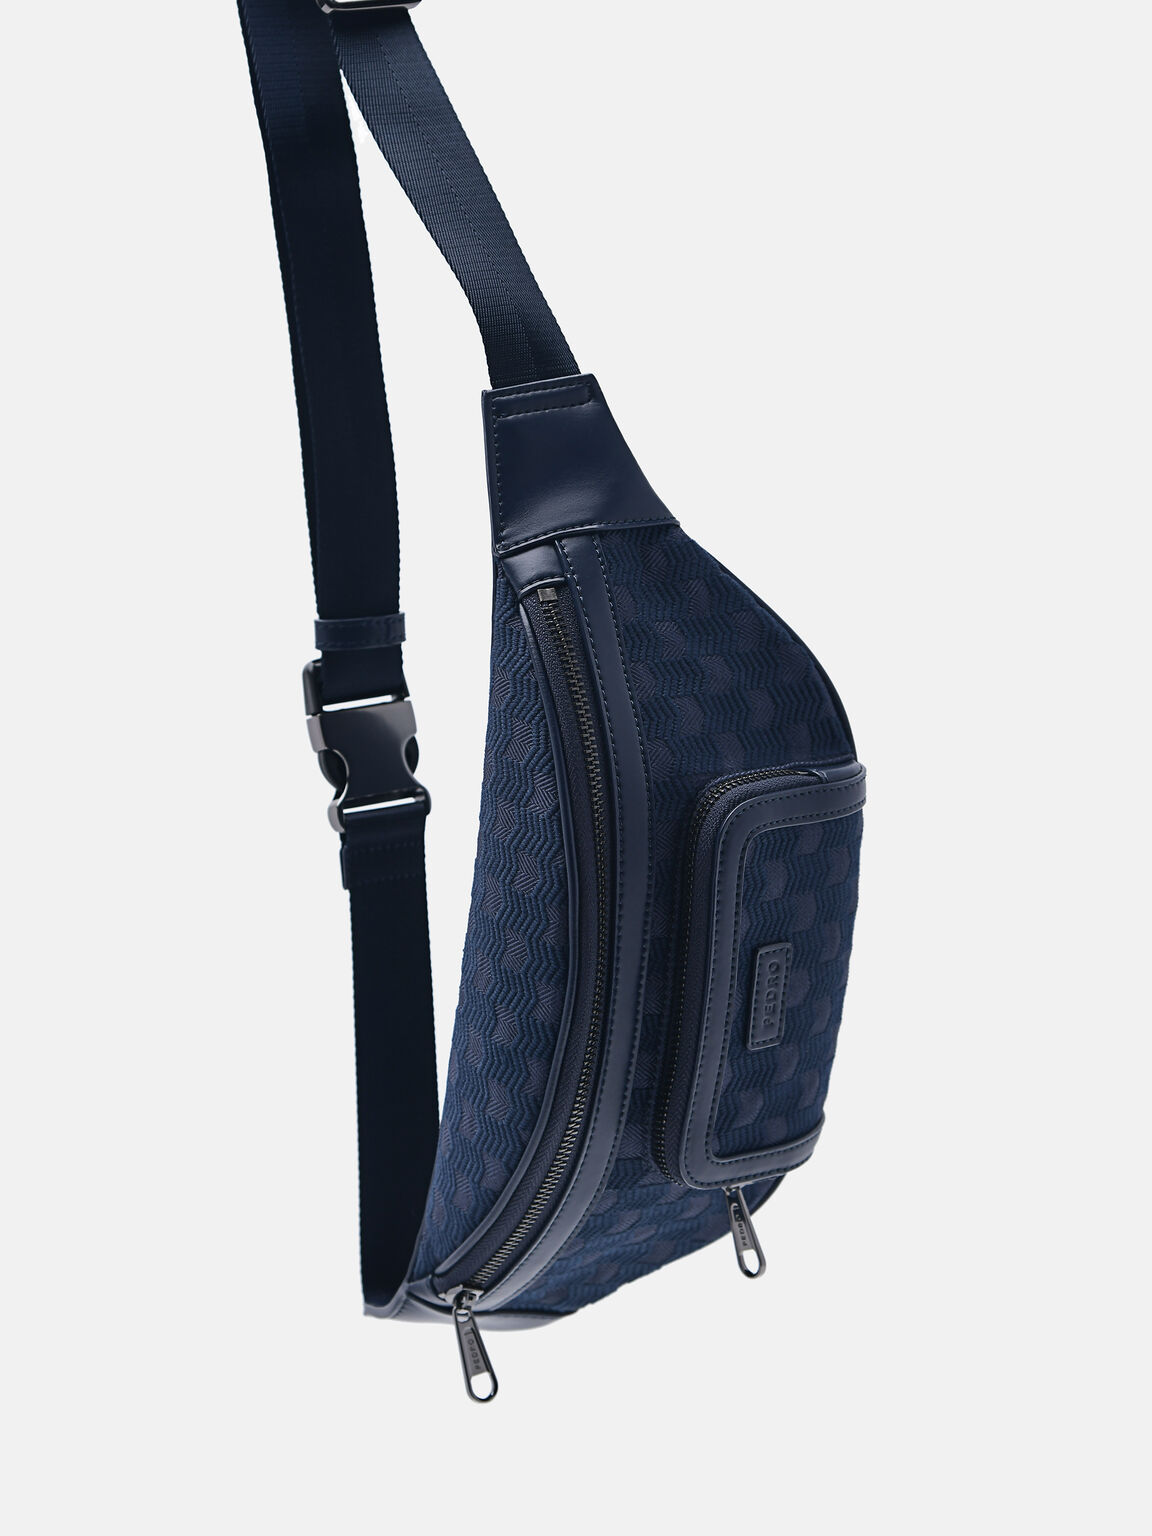 Fred Sling Pouch, Navy, hi-res